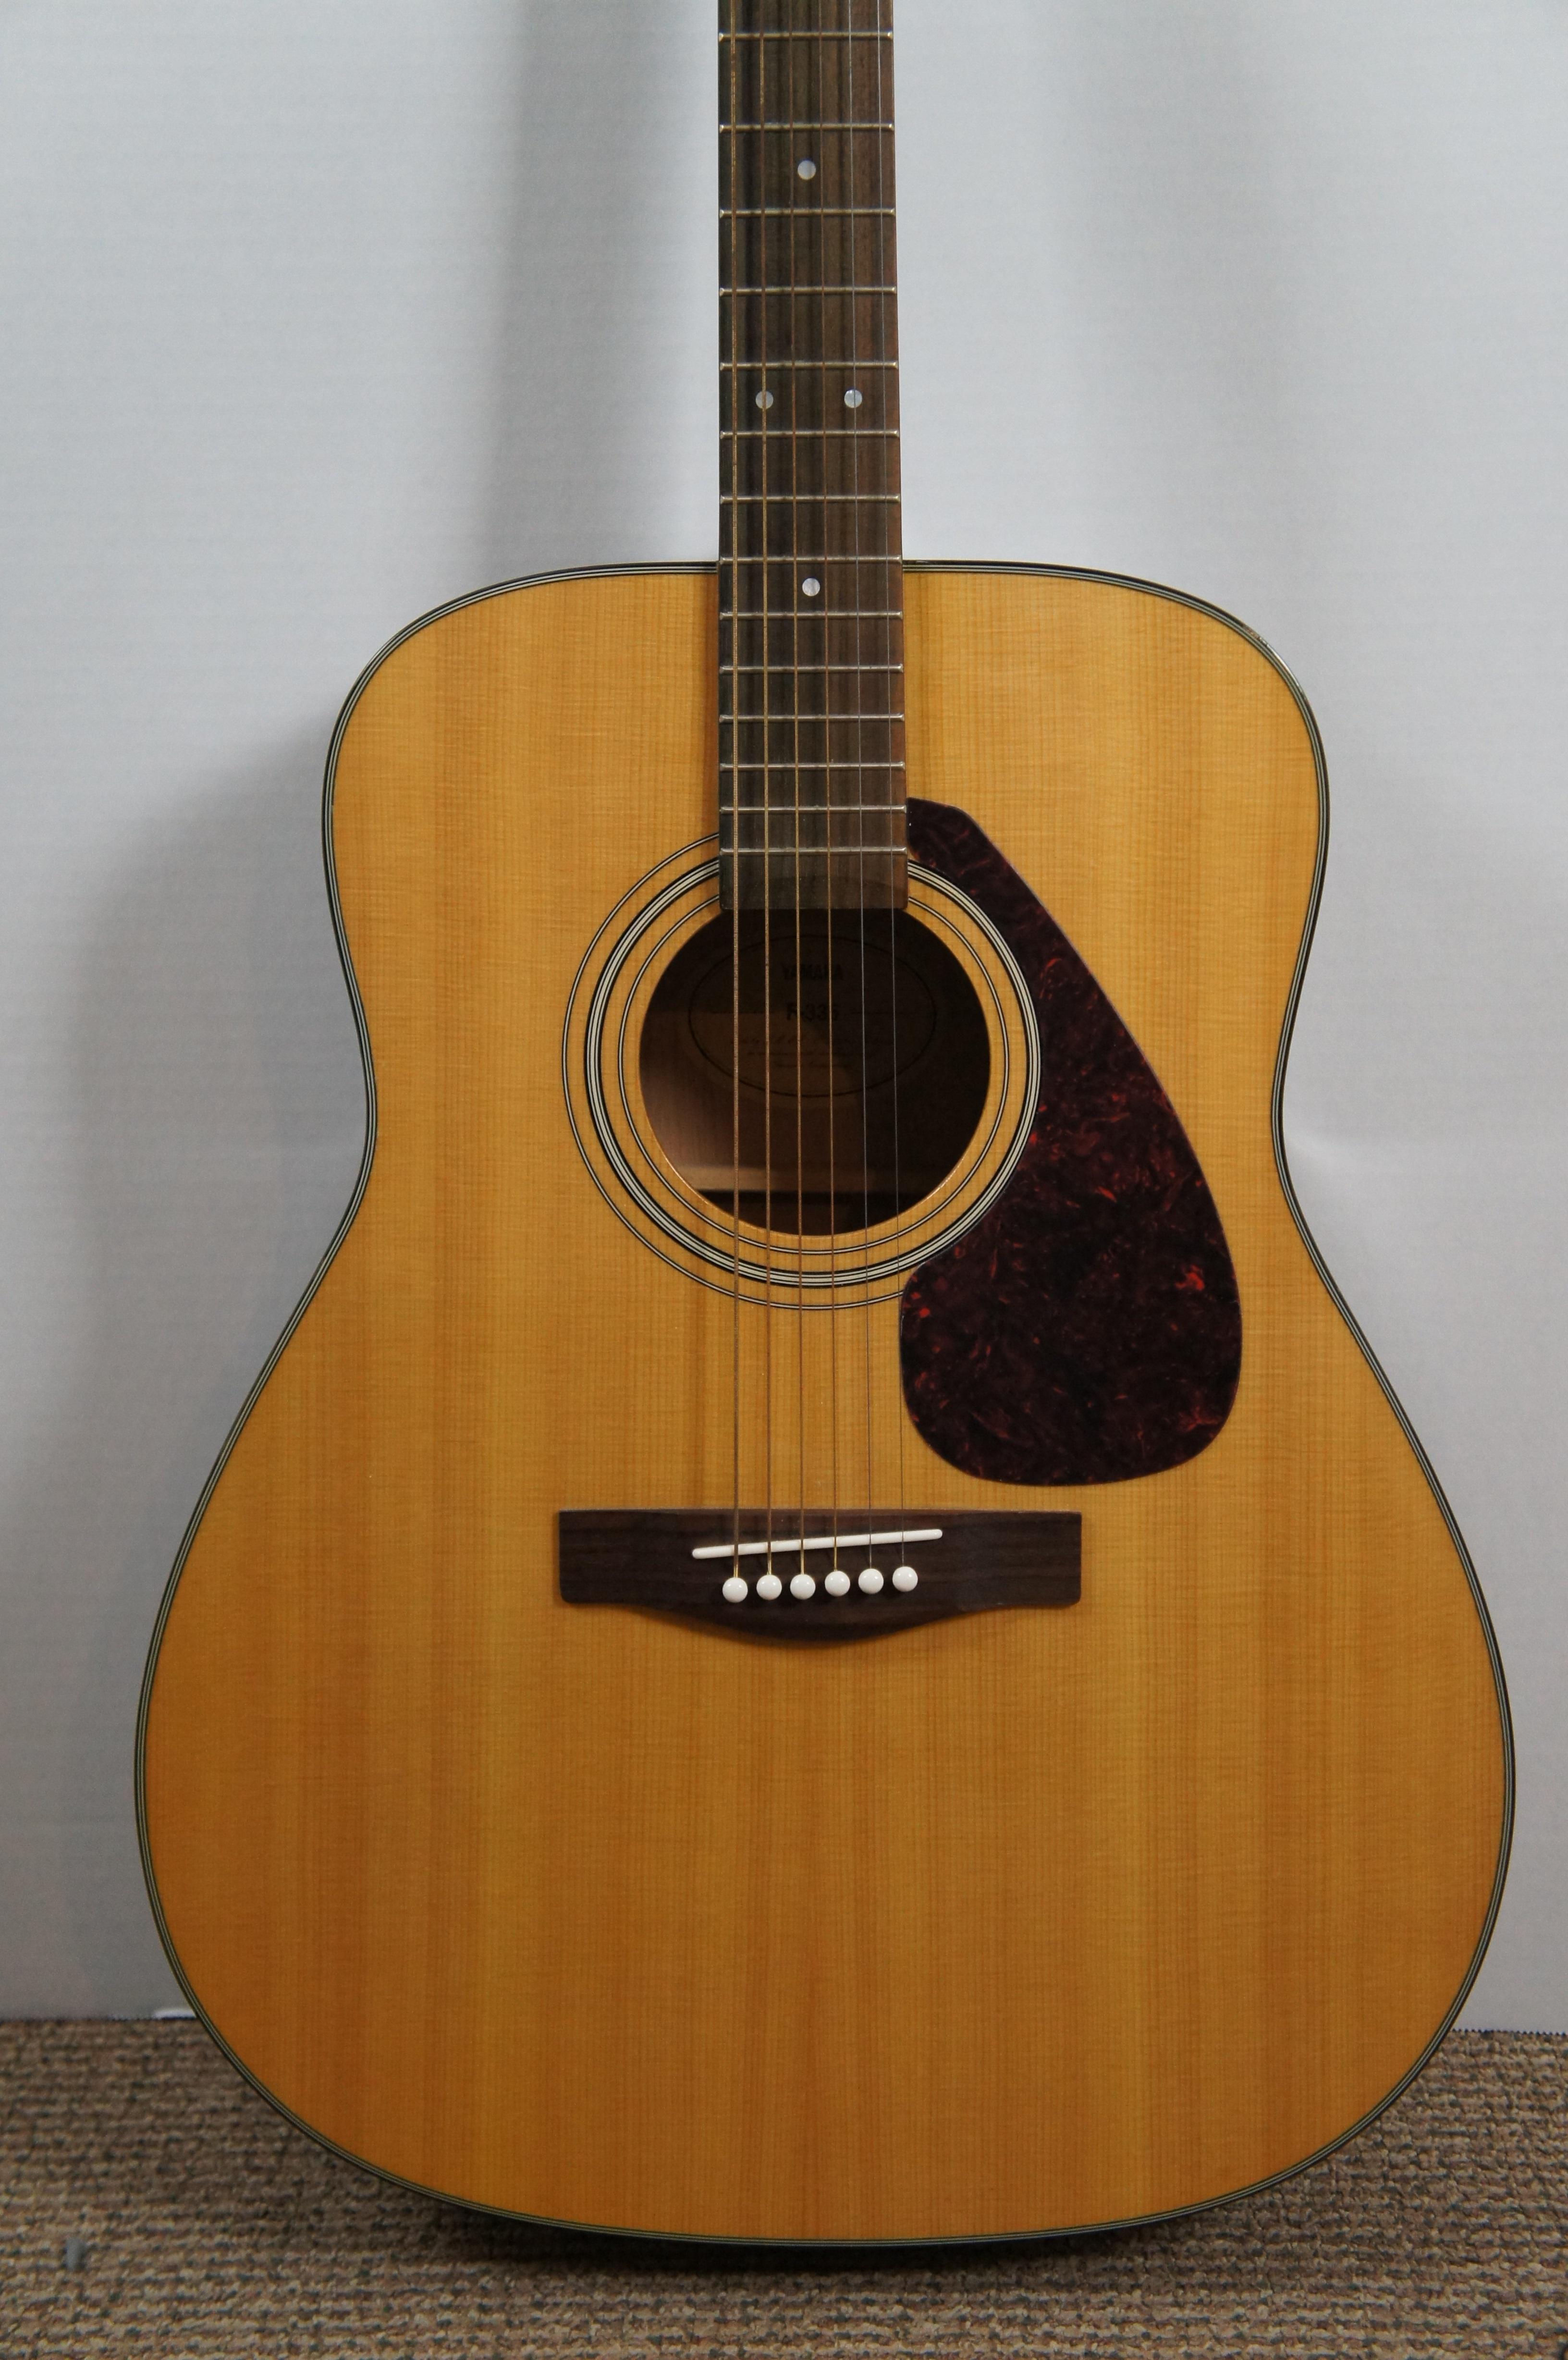 Yamaha F335 Acoustic Guitar w Tuner Strings & Soft Shell Case  In Good Condition For Sale In Dayton, OH